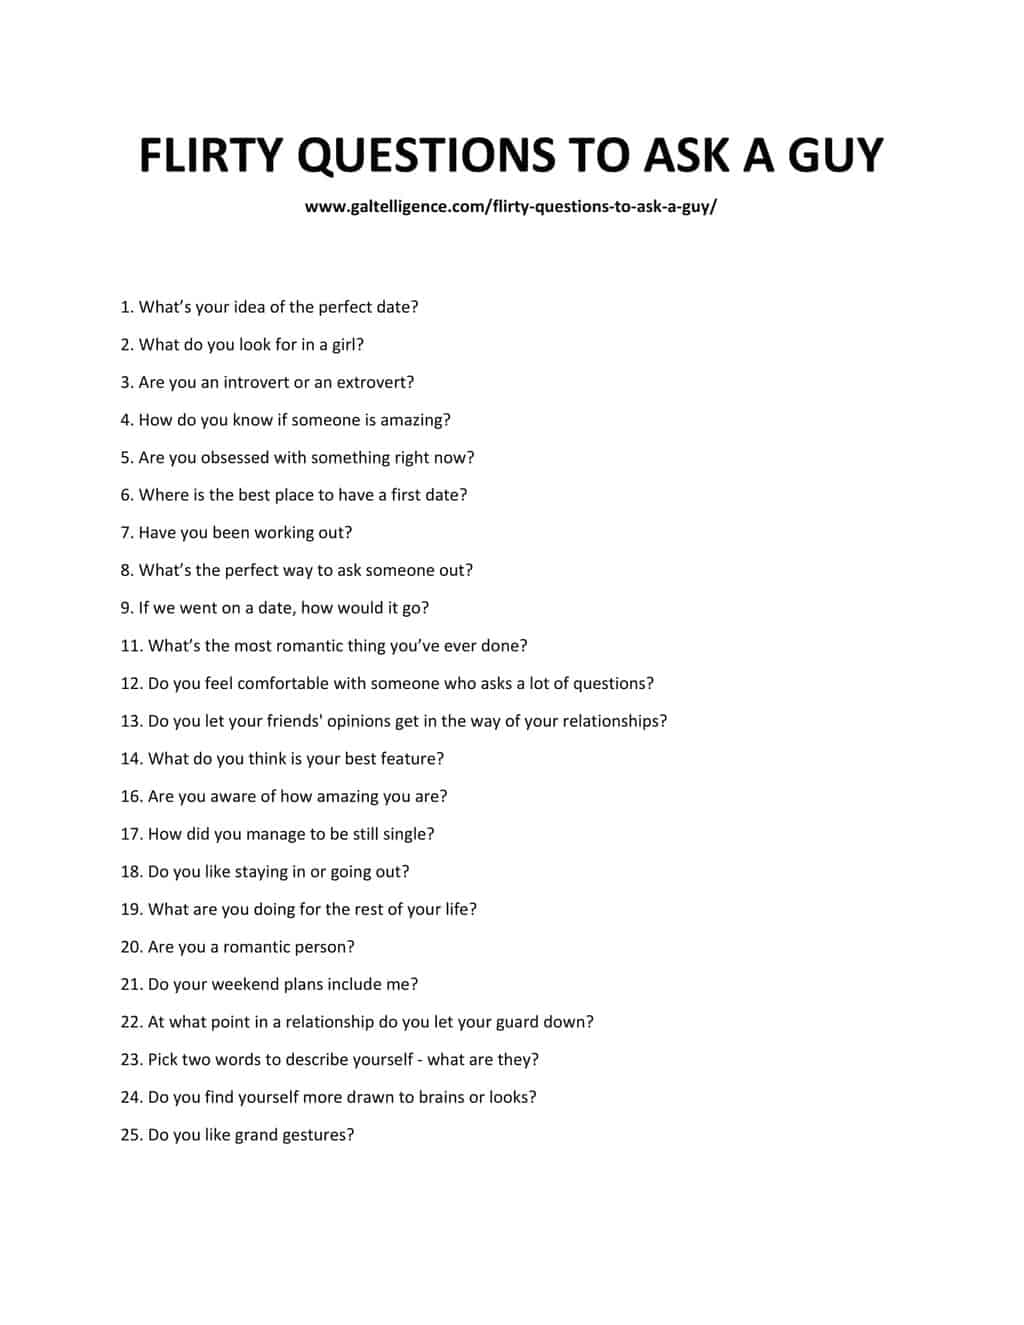 Ask questions guy a game question to 21 Questions